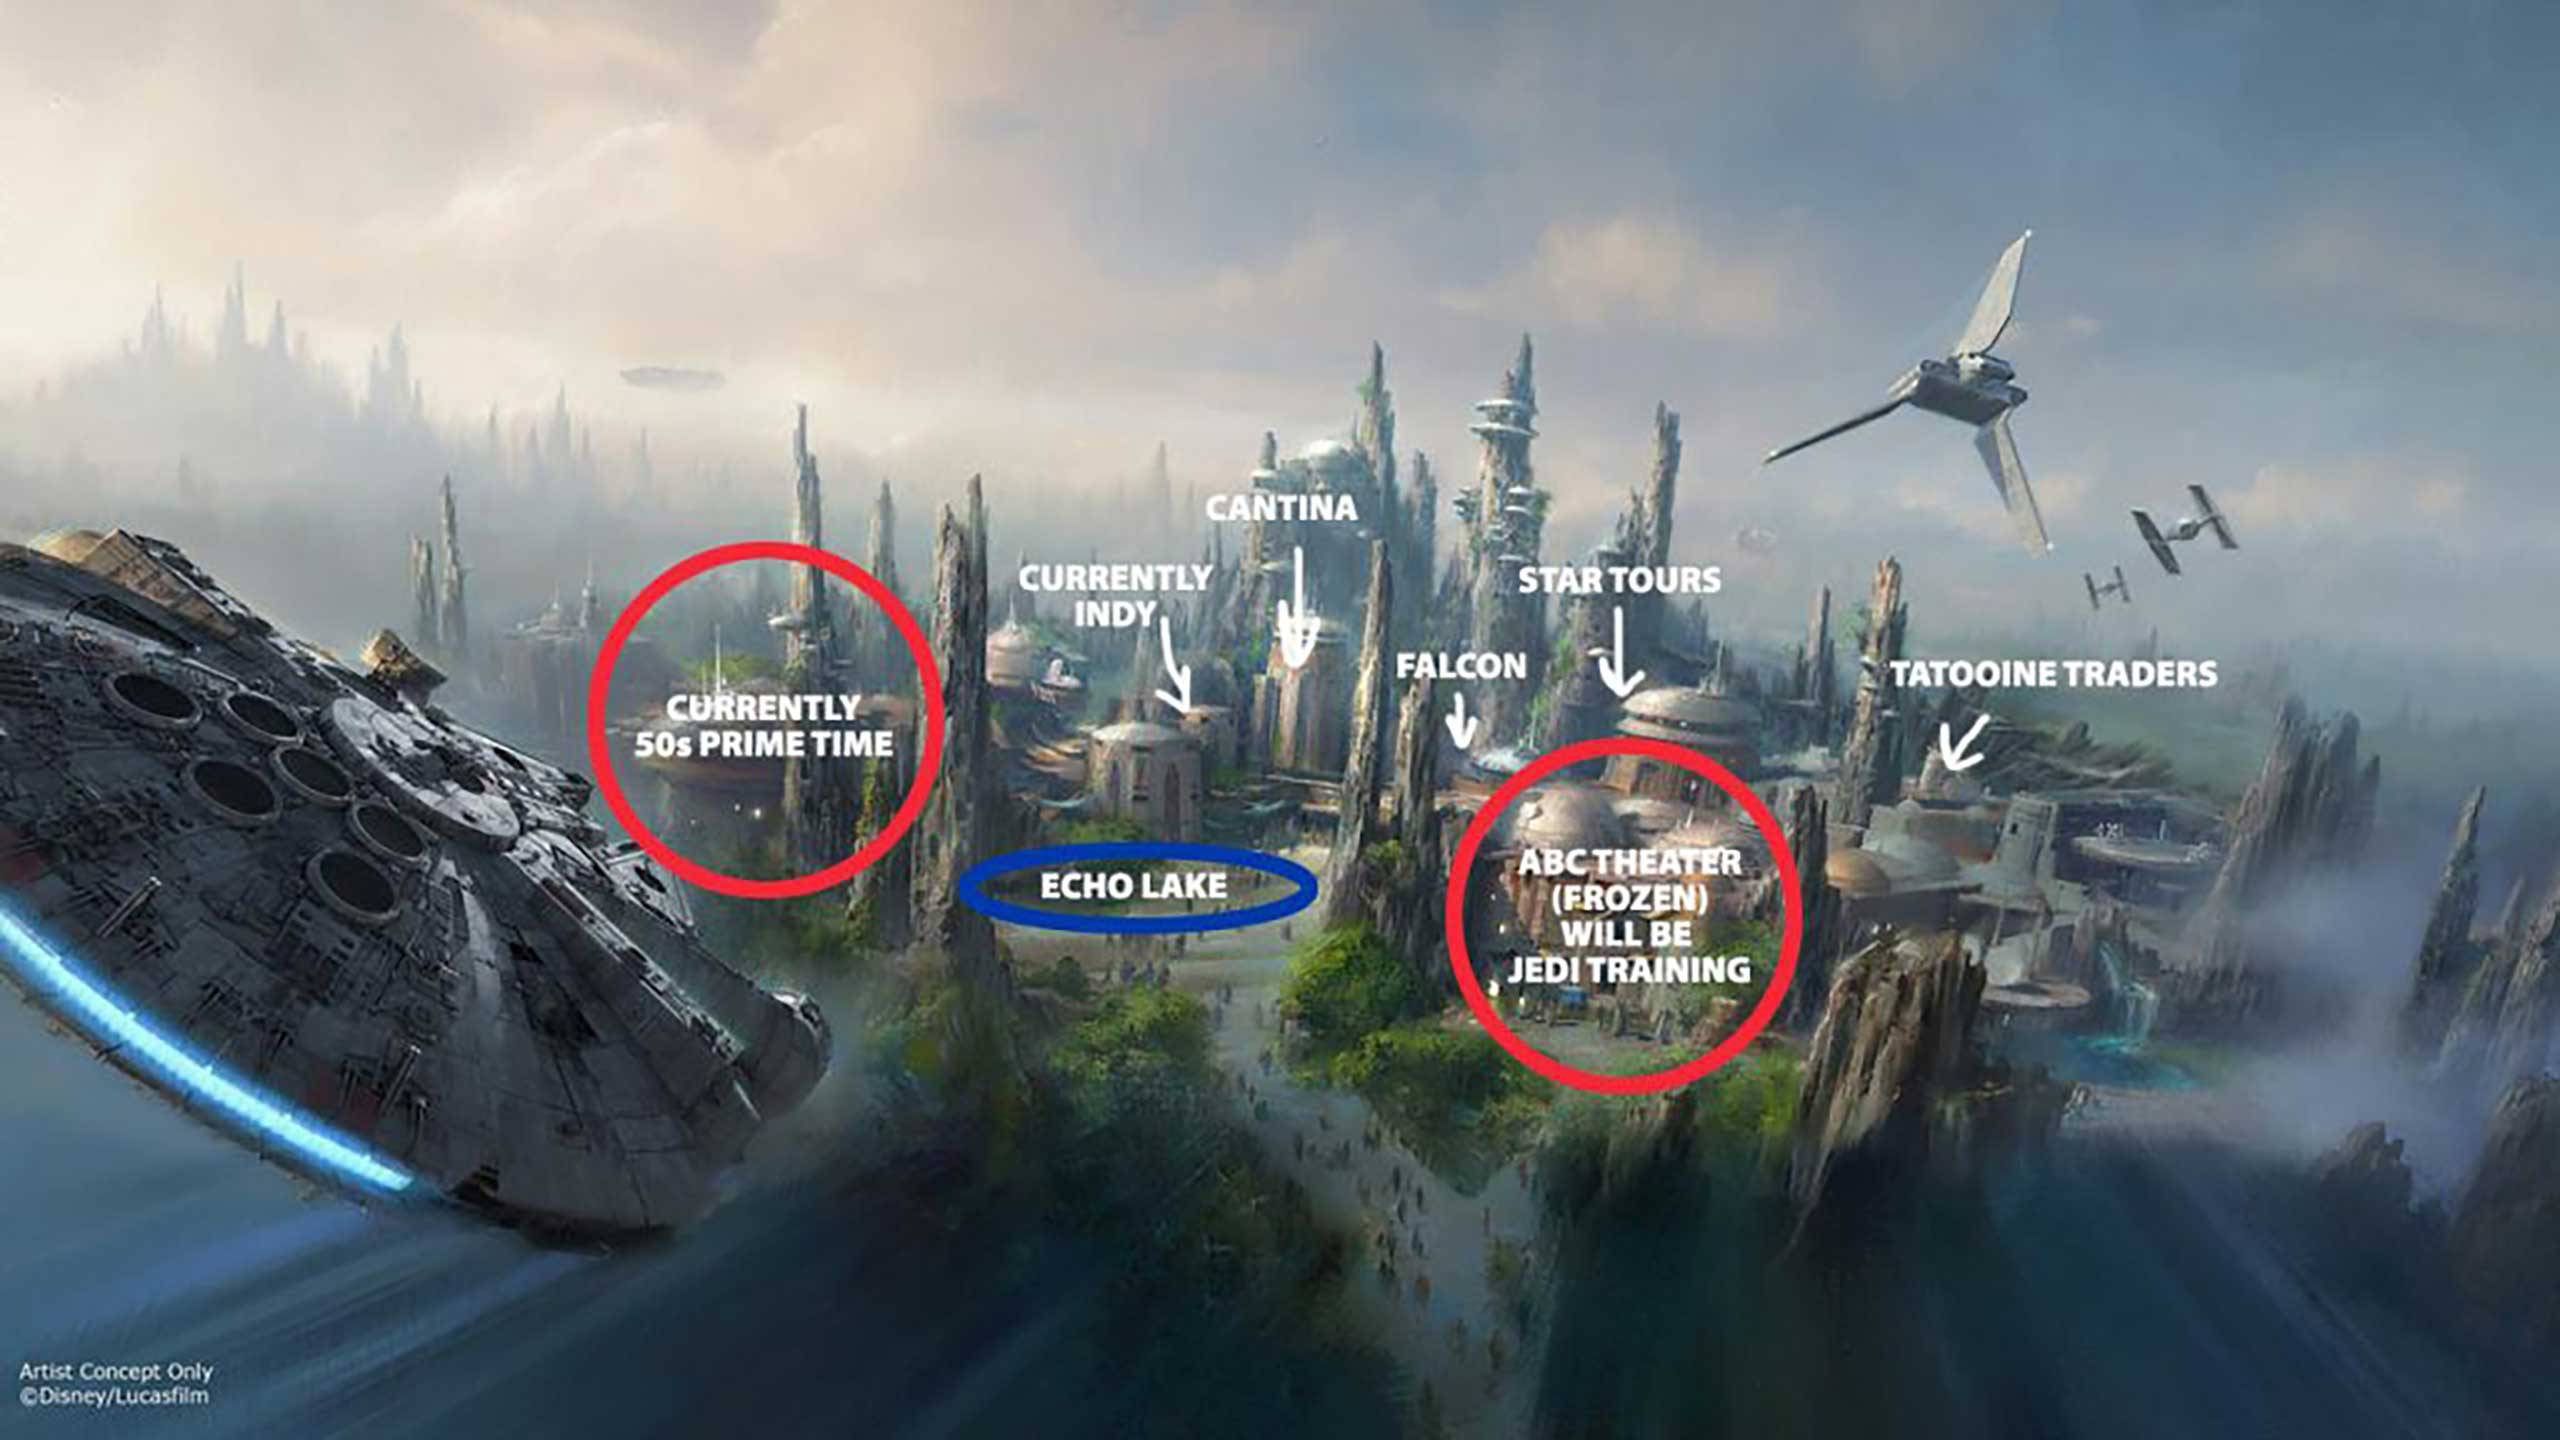 How Star Wars Land and Toy Story Land may fit within Disney's Hollywood Studios